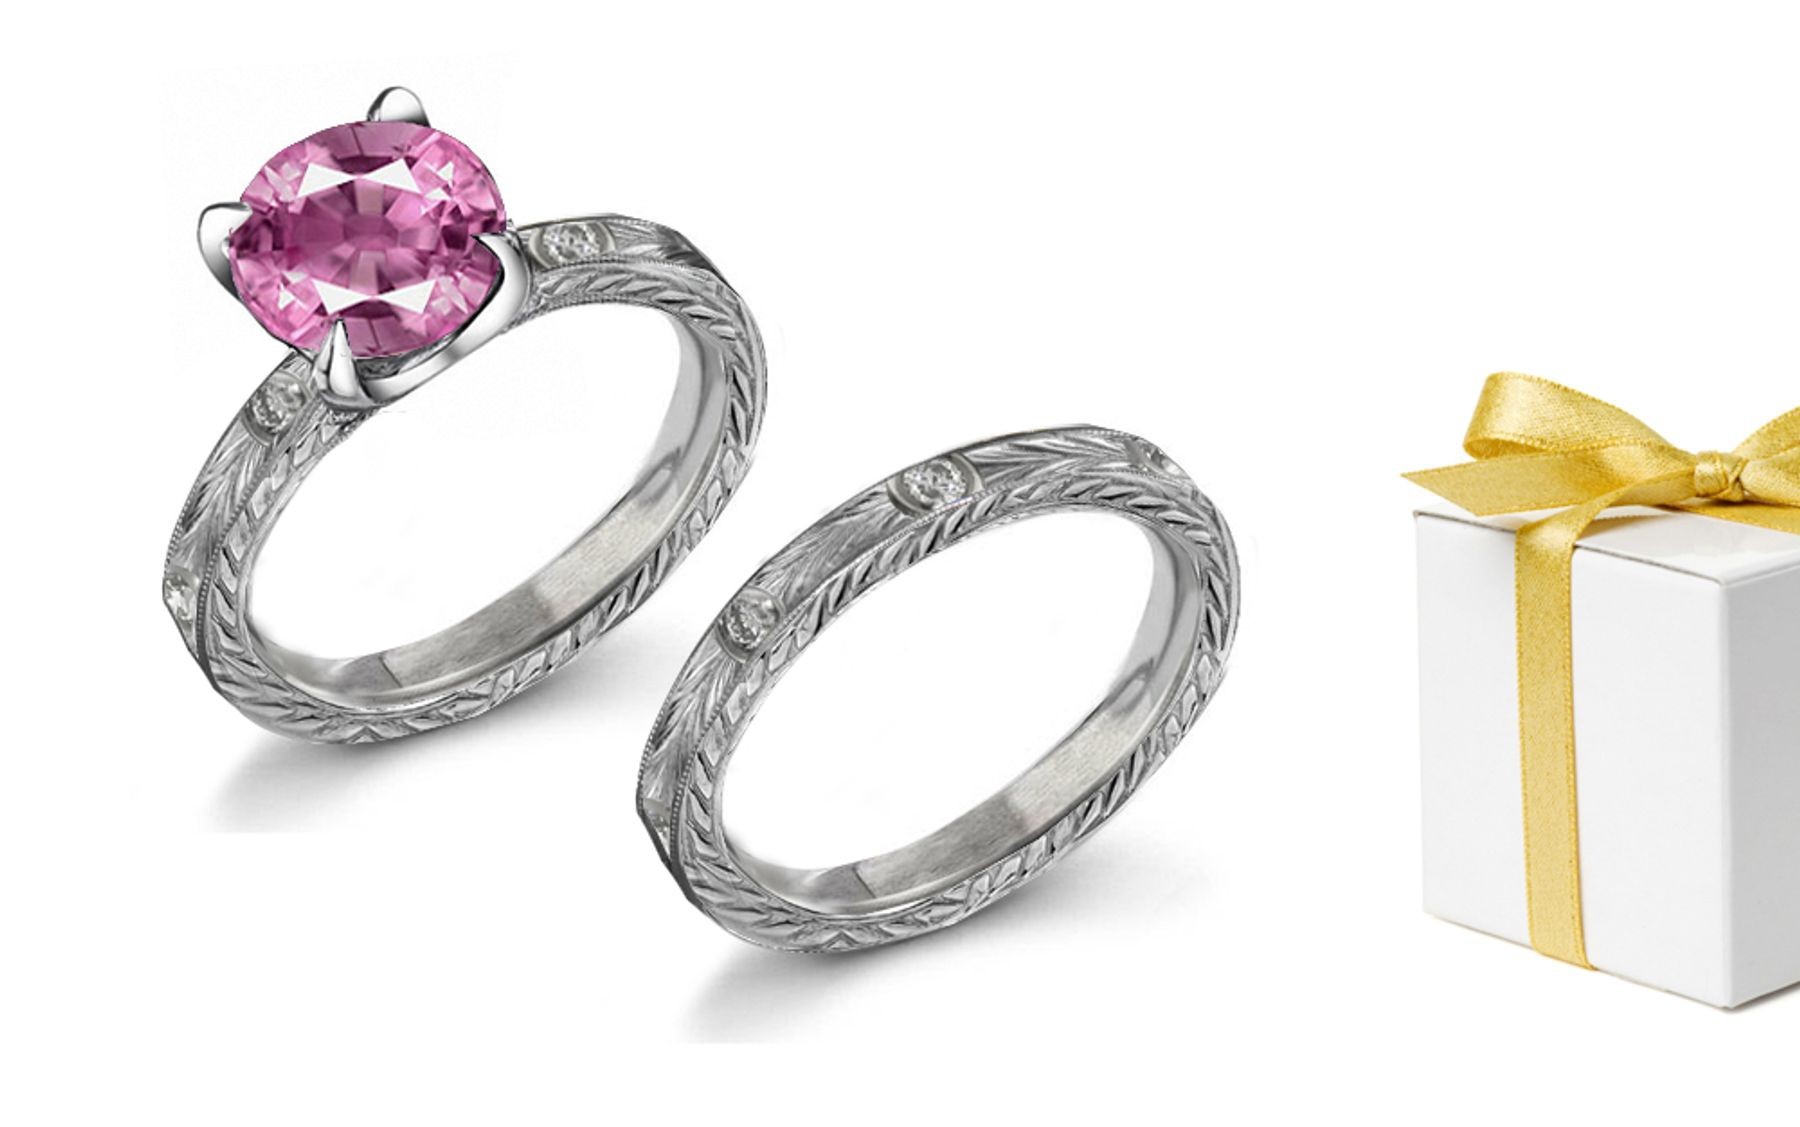 Pink: Hand Engraved Pink Sapphire & Diamond Ring Click the Link To Add to Shopping Cart